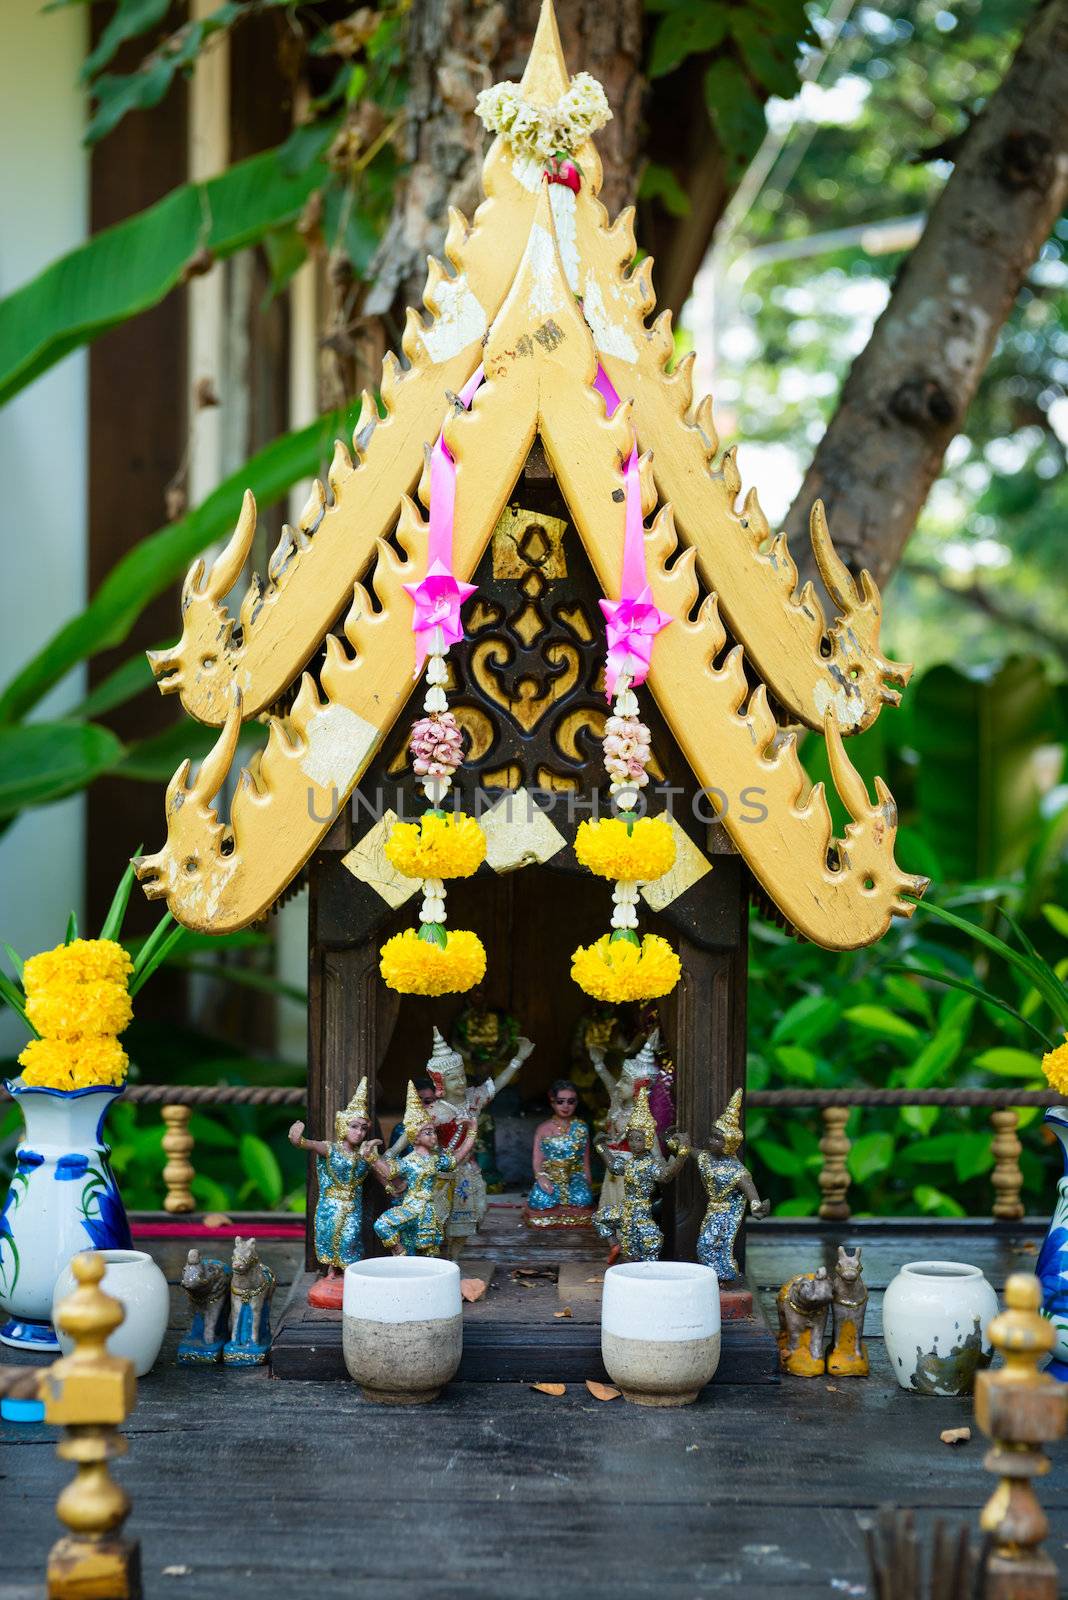 Small spirit house in Thailand with flowers and statuettes